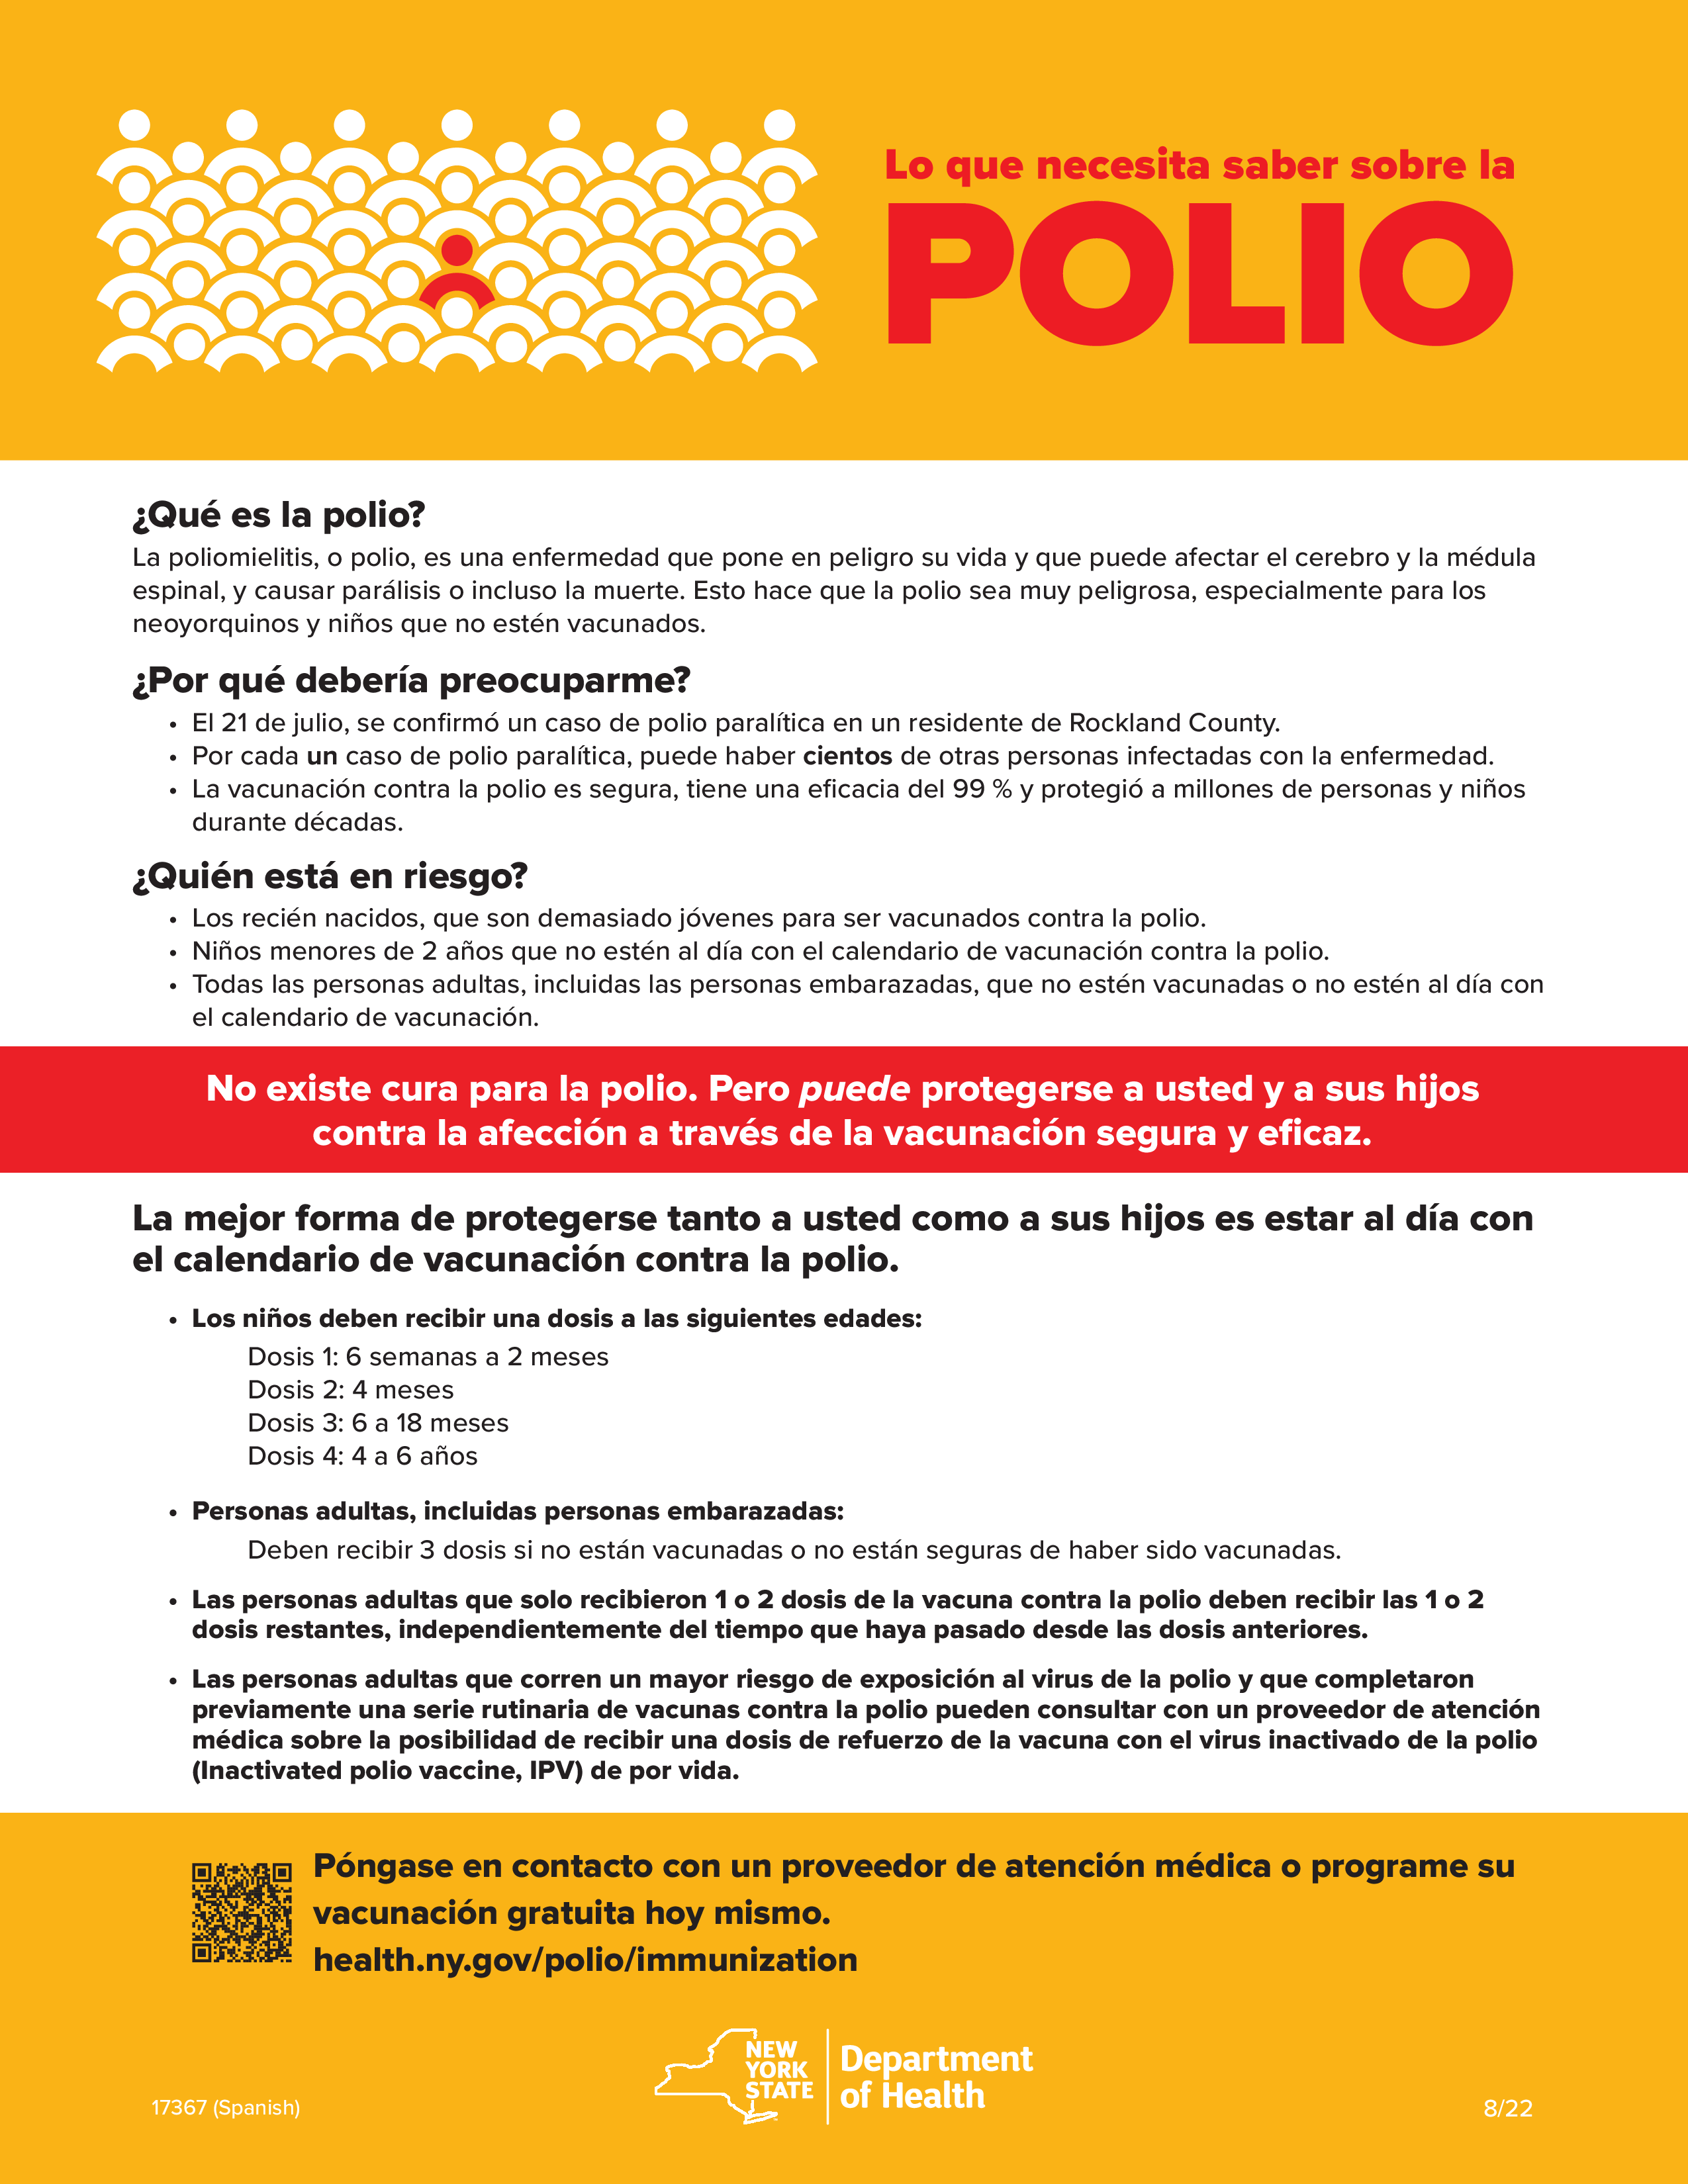 Yellow, white, and red colored factsheet in Spanish with QR code, New York State Department of Health logo and web link to get more information at the bottom.